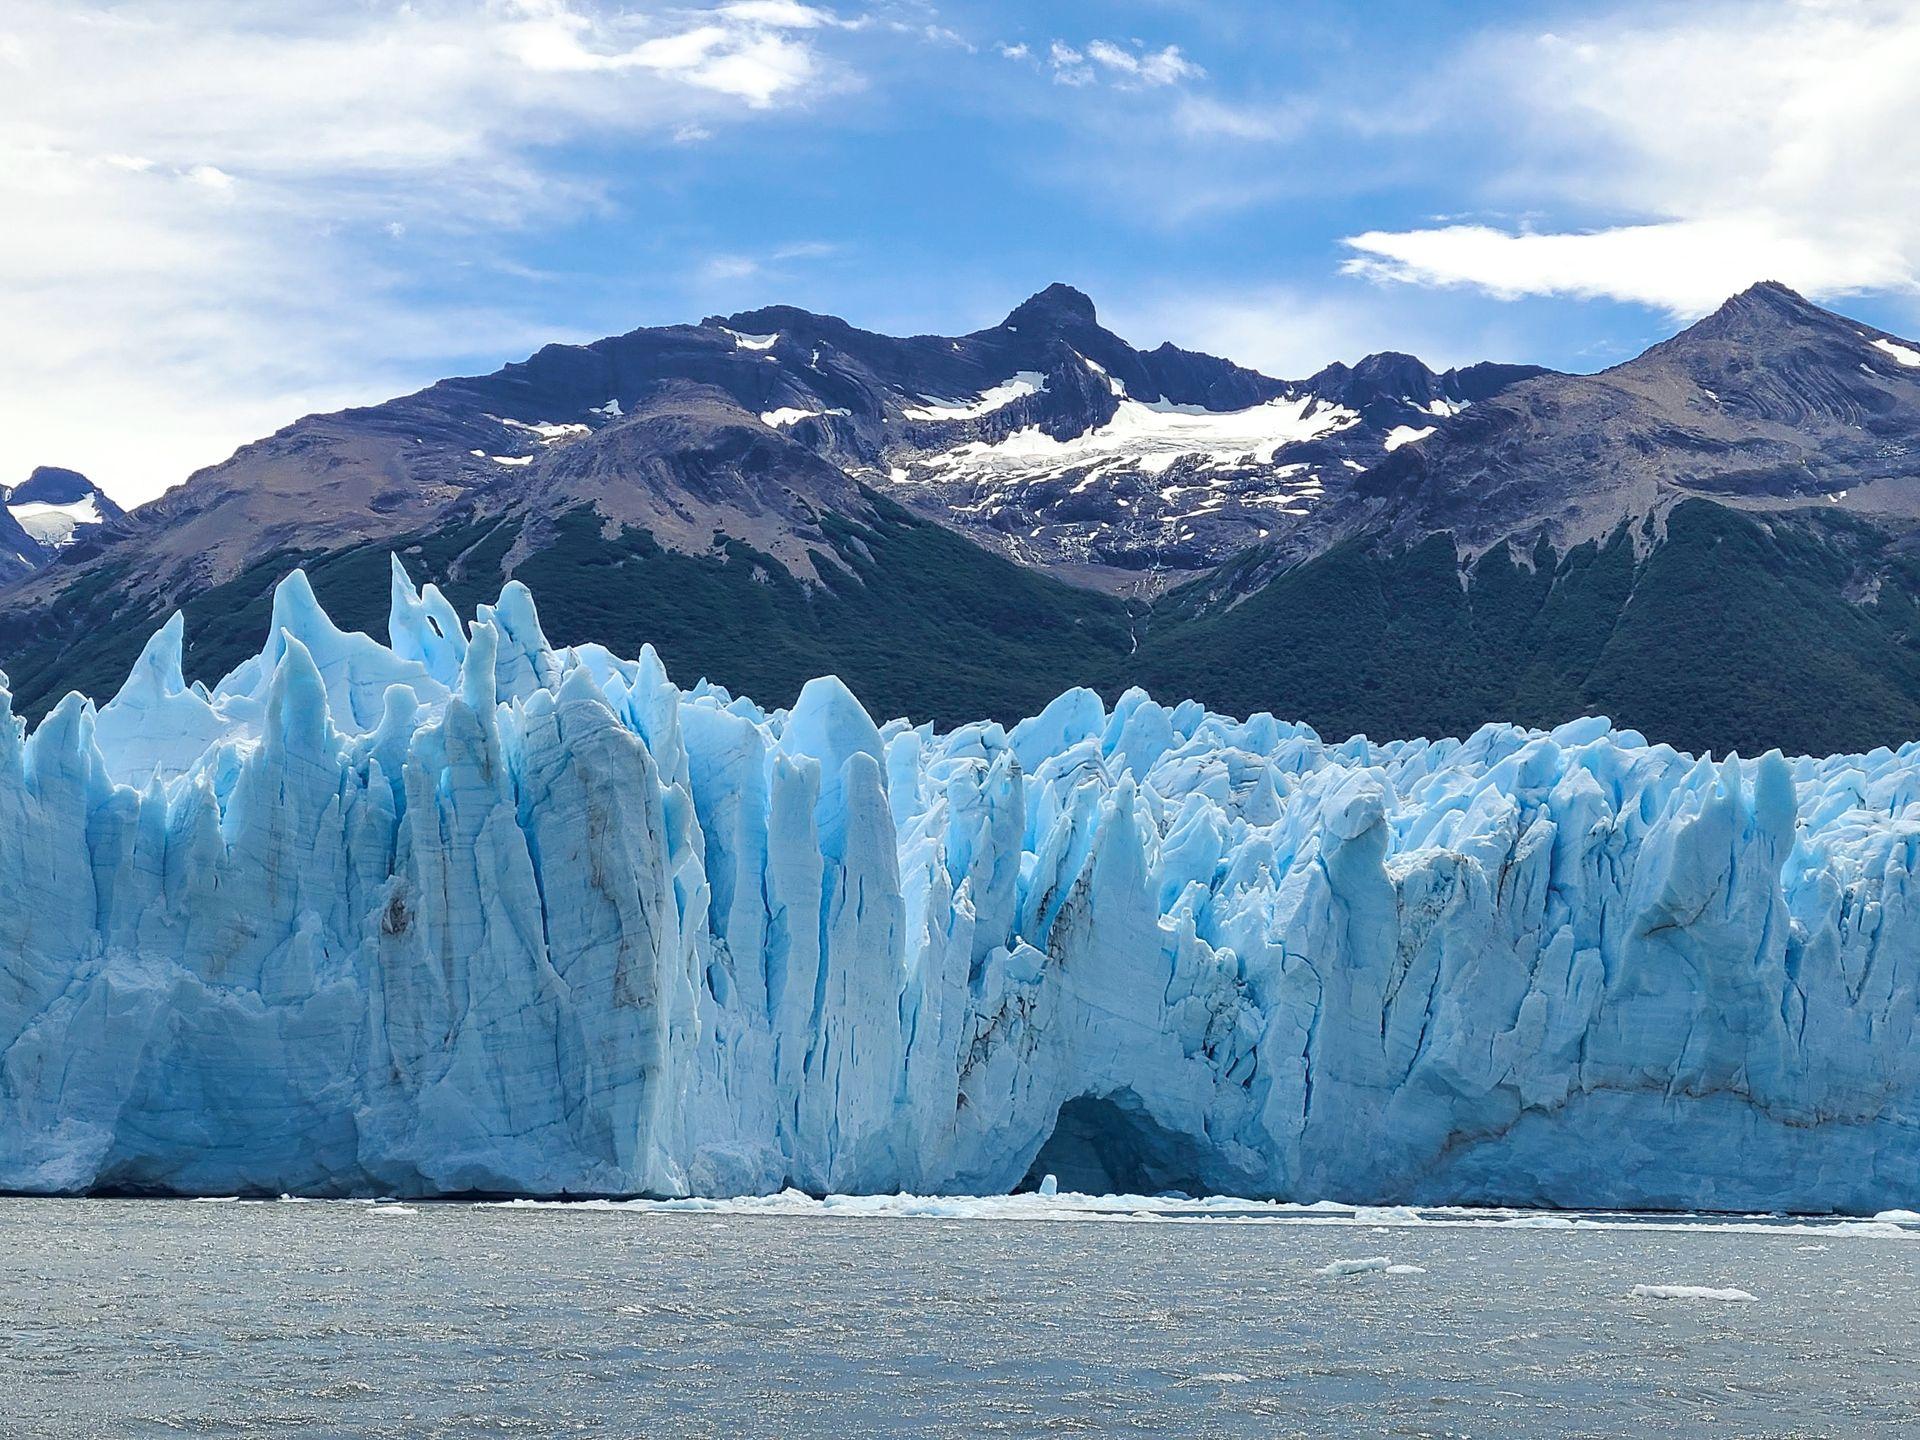 A giant blue glacier on the edge of the water with mountains in the background. The glacier is a brilliant blue and full of jagged ice formations.